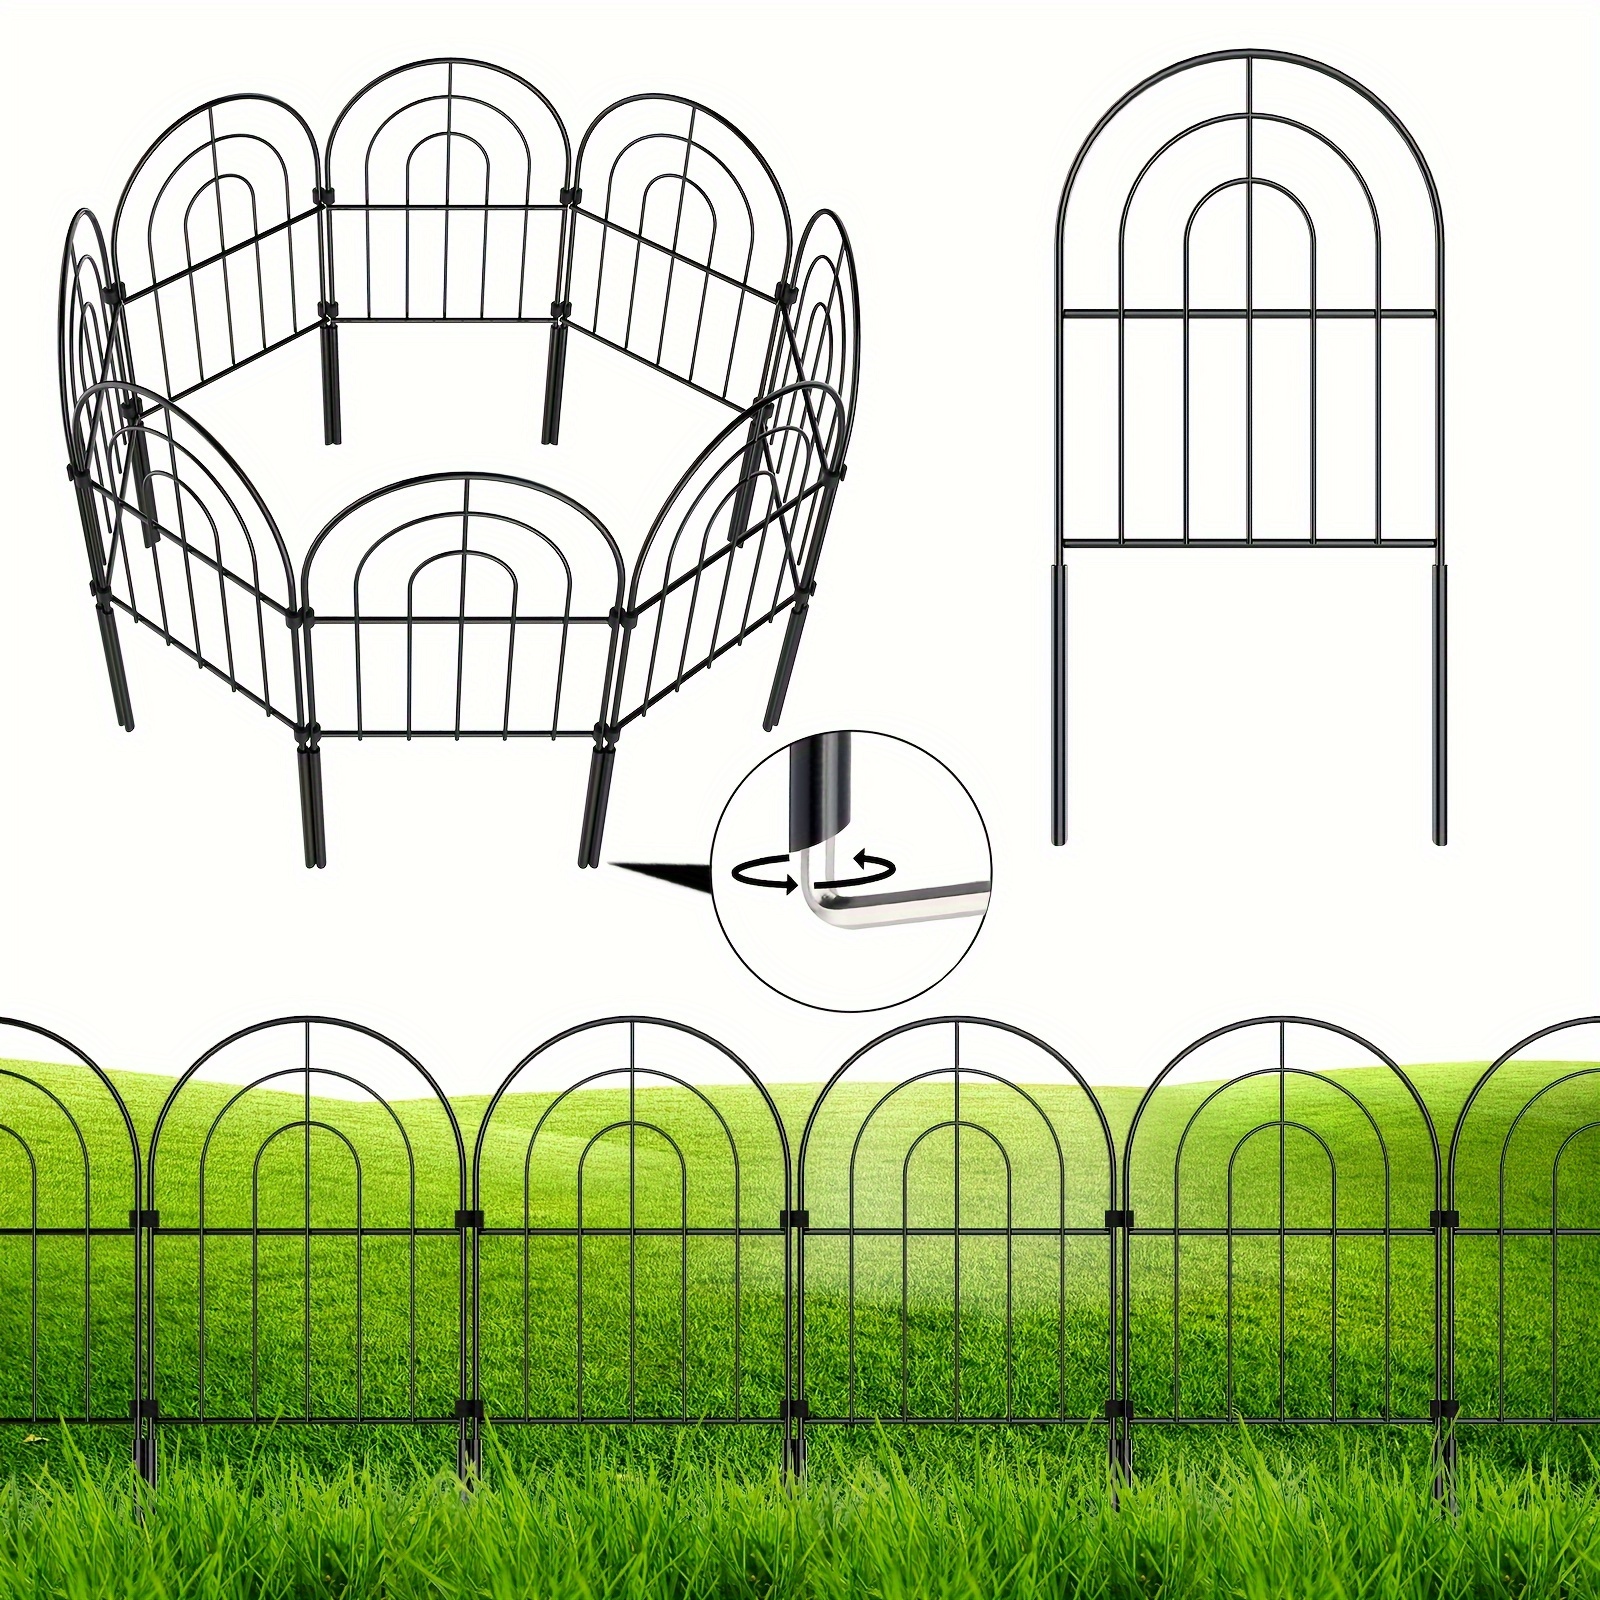 

12pcs Decorative Garden Fence, Total Length 10"(l)x 24"(h), Digging Free Rustproof Wire Fence, Animal Barrier, Macrame, For Landscape Yard Outdoor Decoration